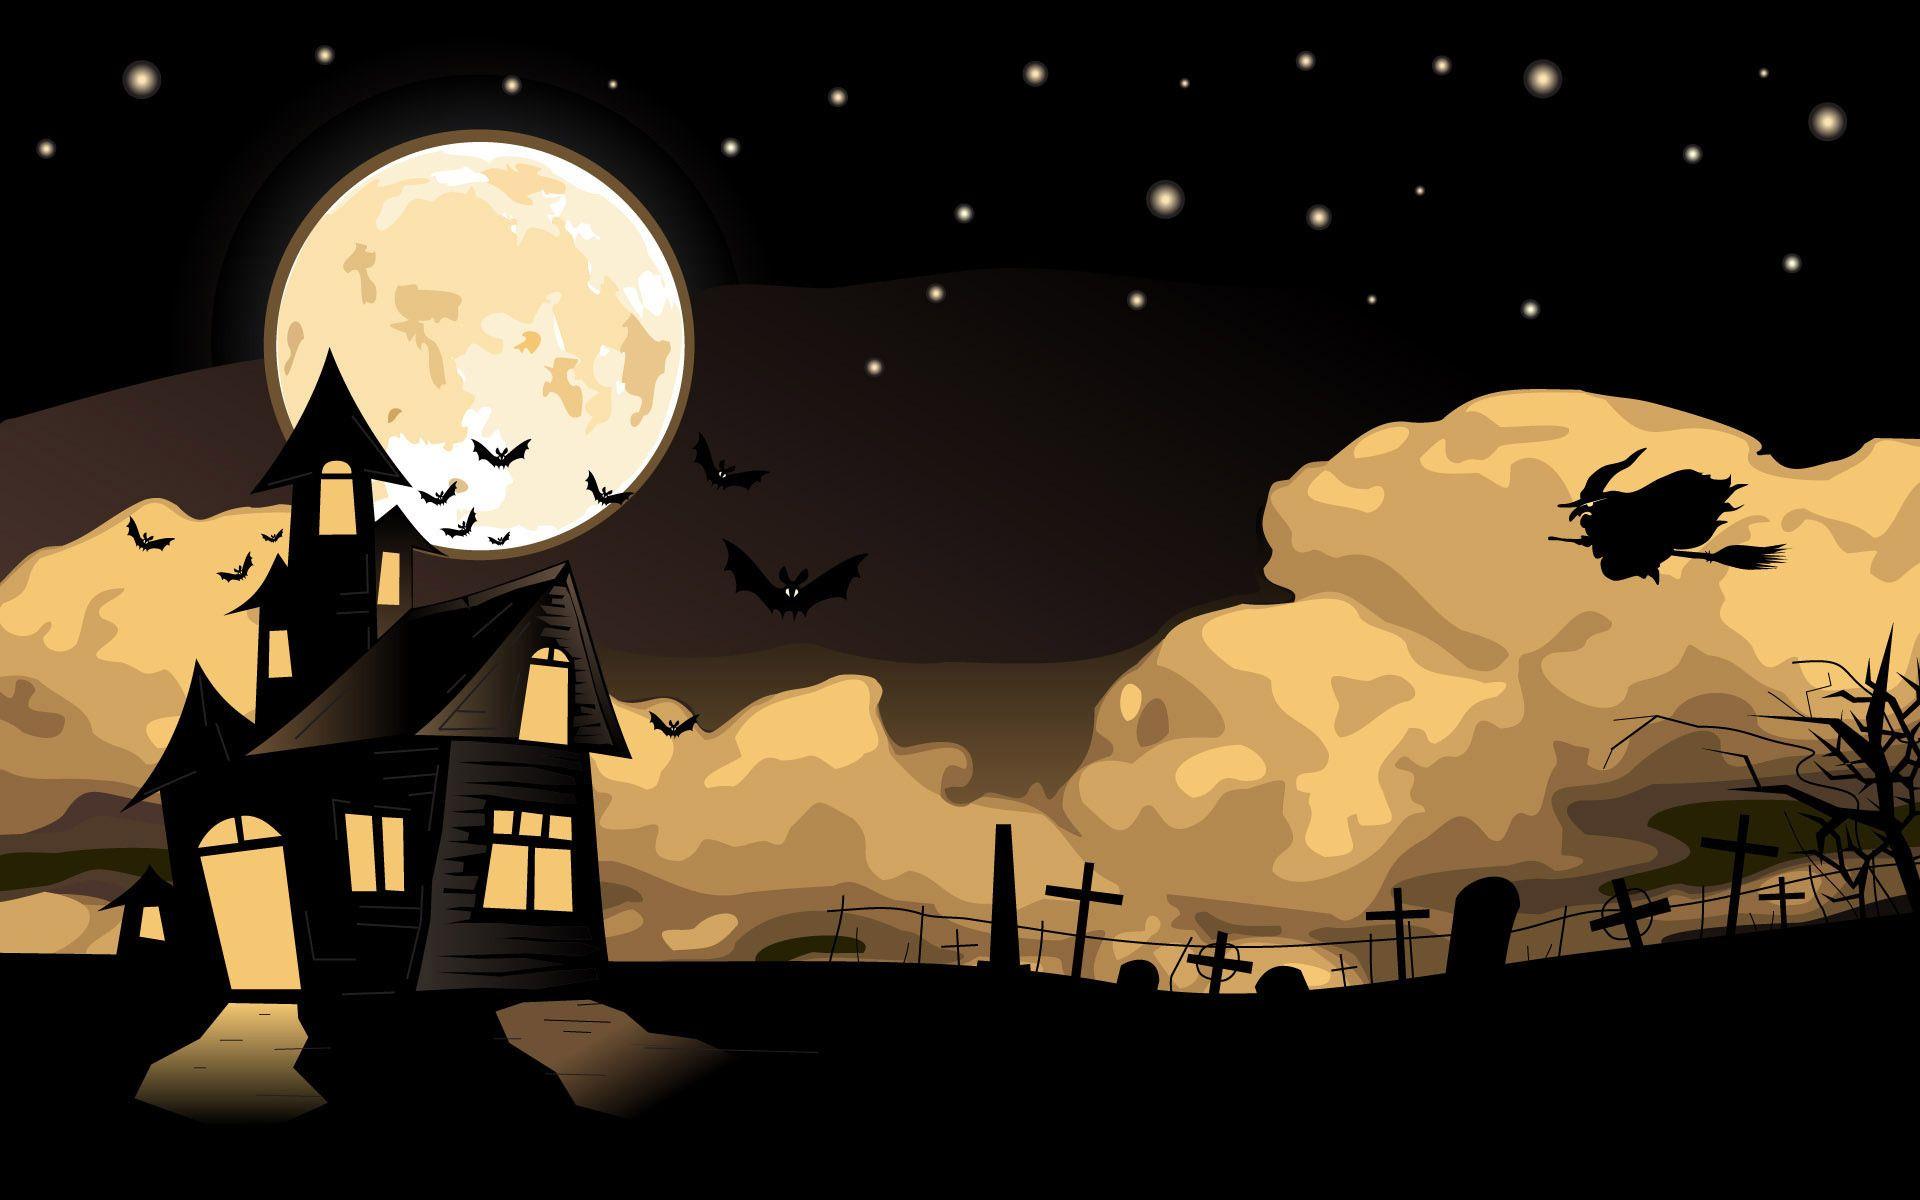 Animated Halloween Wallpapers 62 images